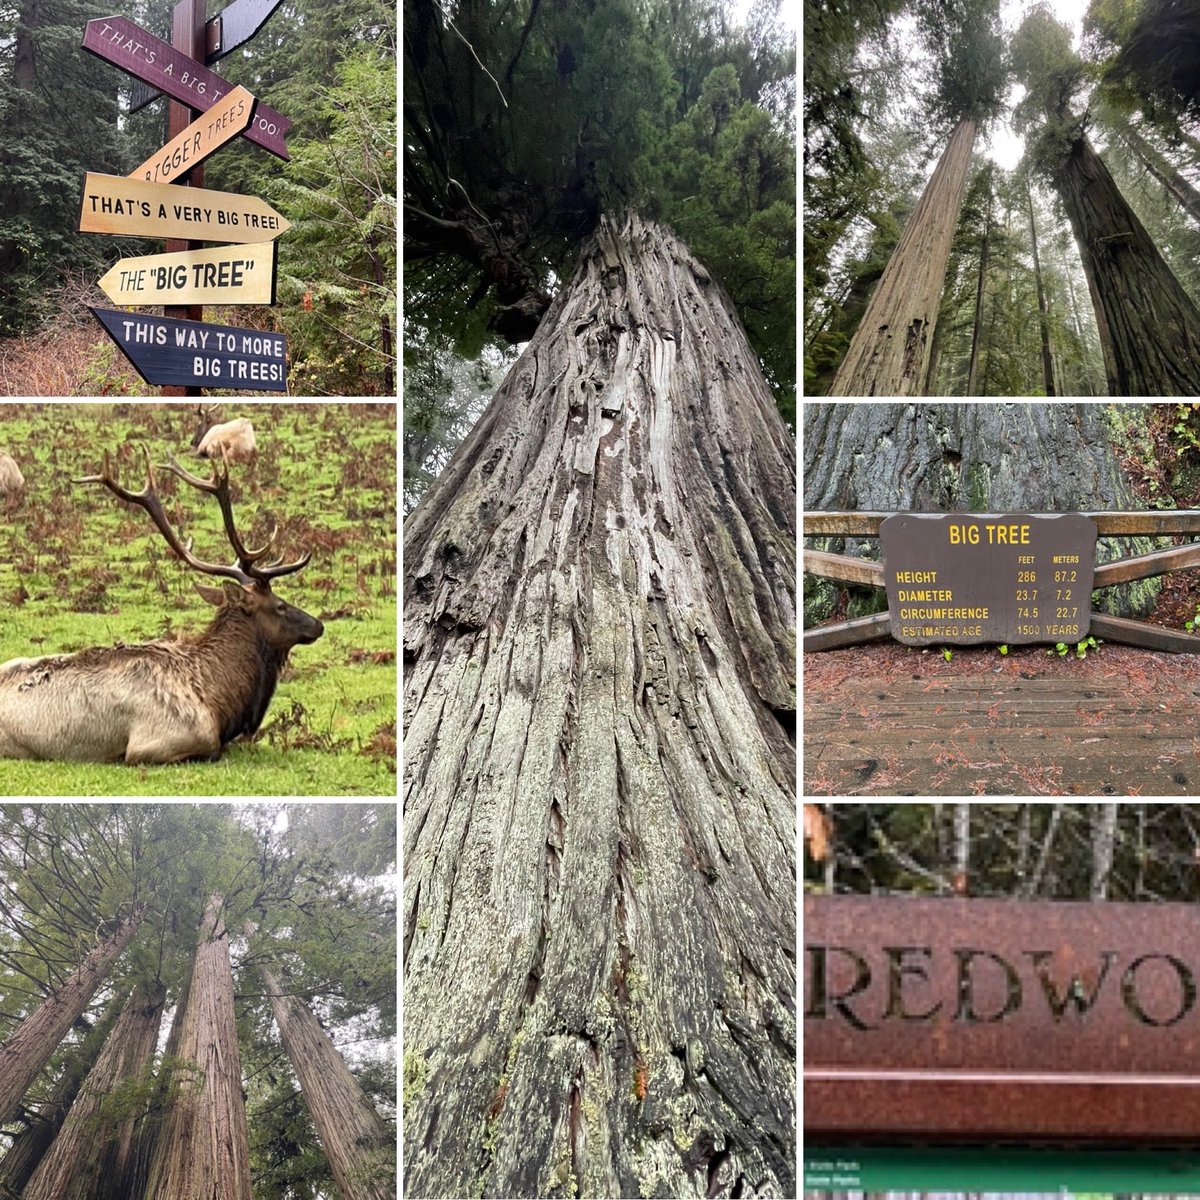 Yup. Very BIG trees. Lots of them. Old growth. And super beautiful. #RedwoodNationalPark